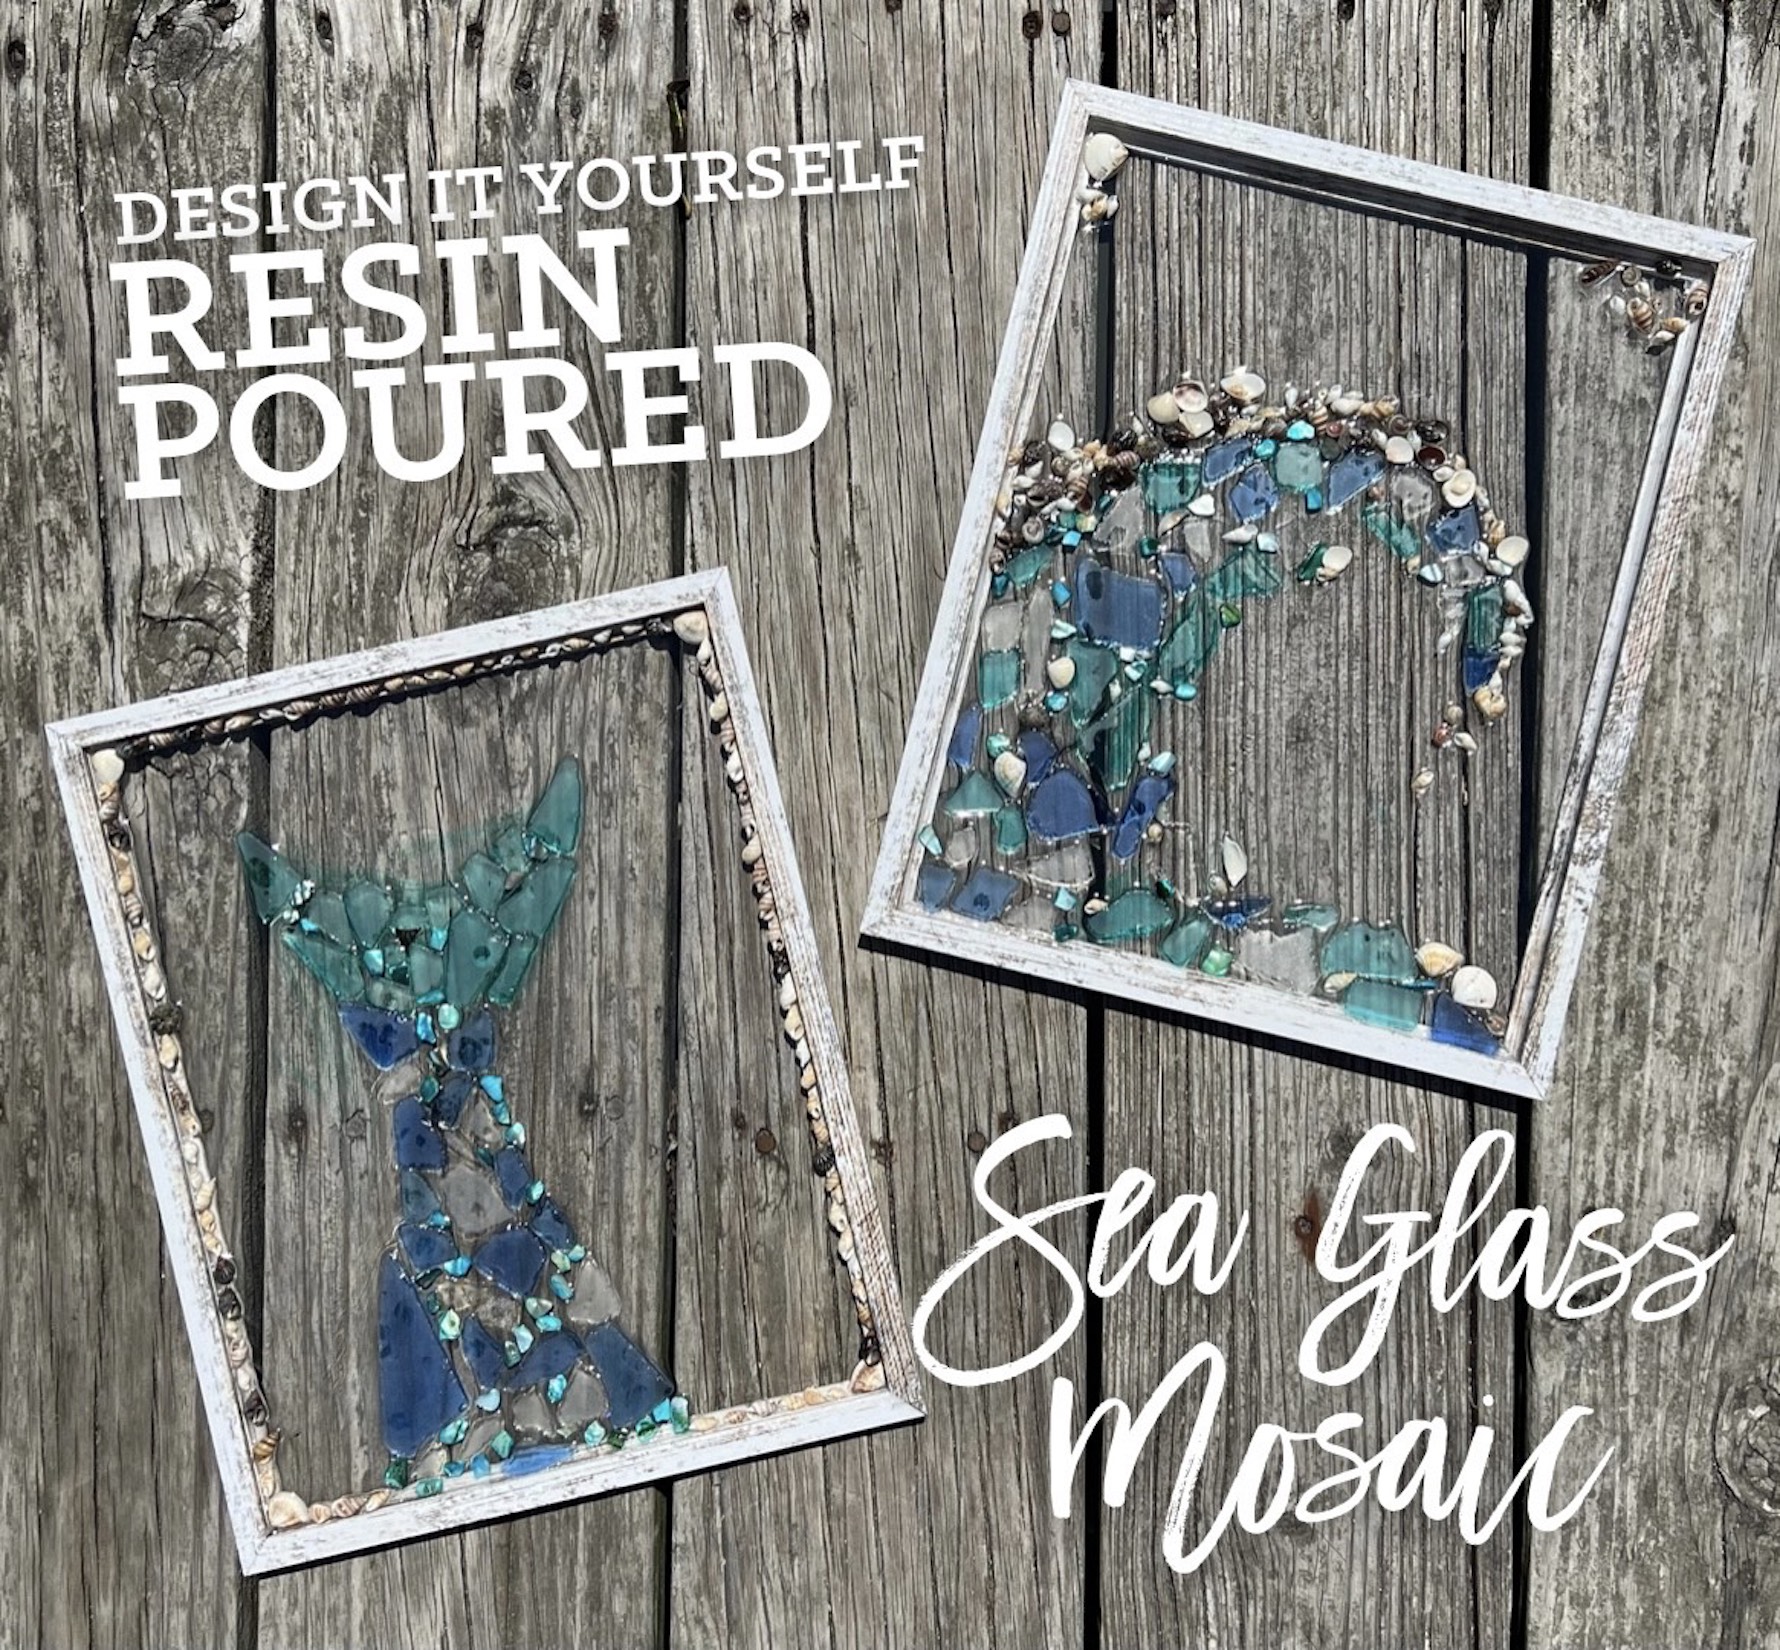 New! Resin Poured Sea Glass Mosaic